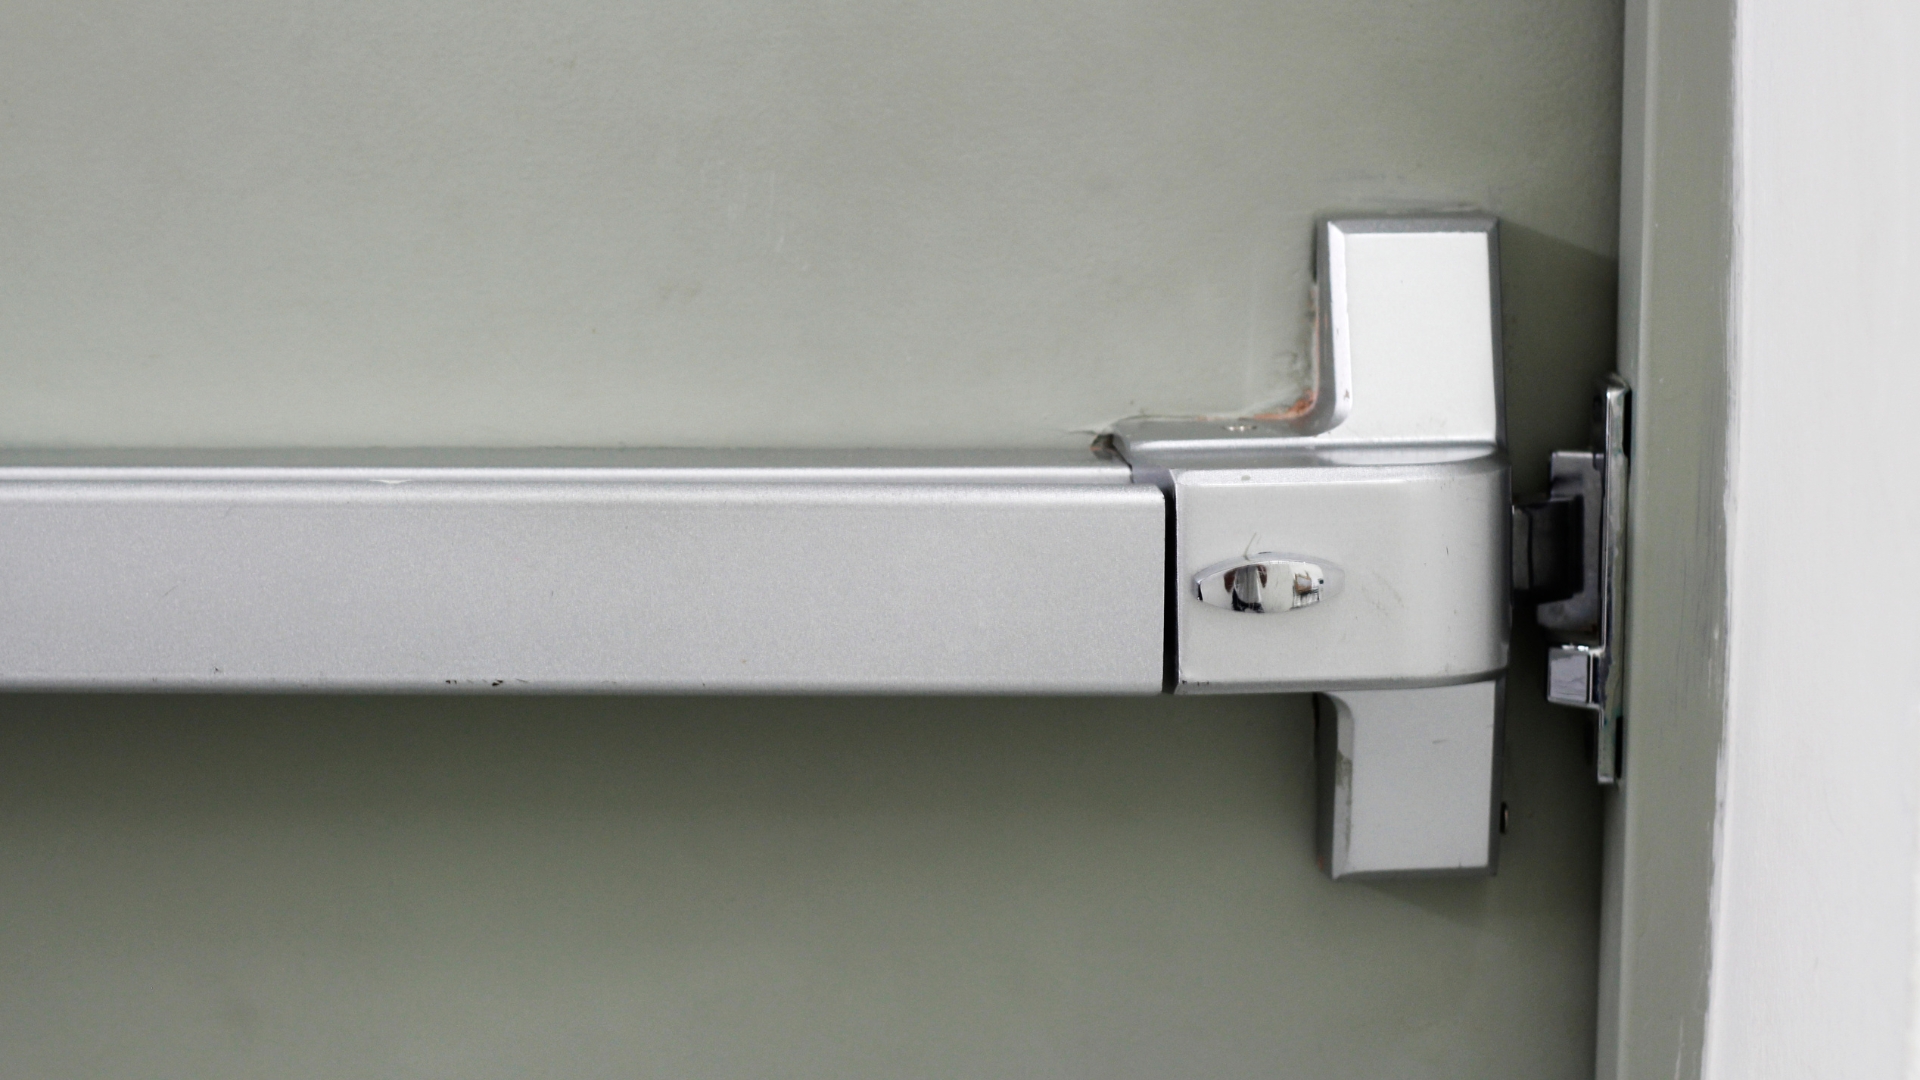 A panic bar as part of a commercial door hardware